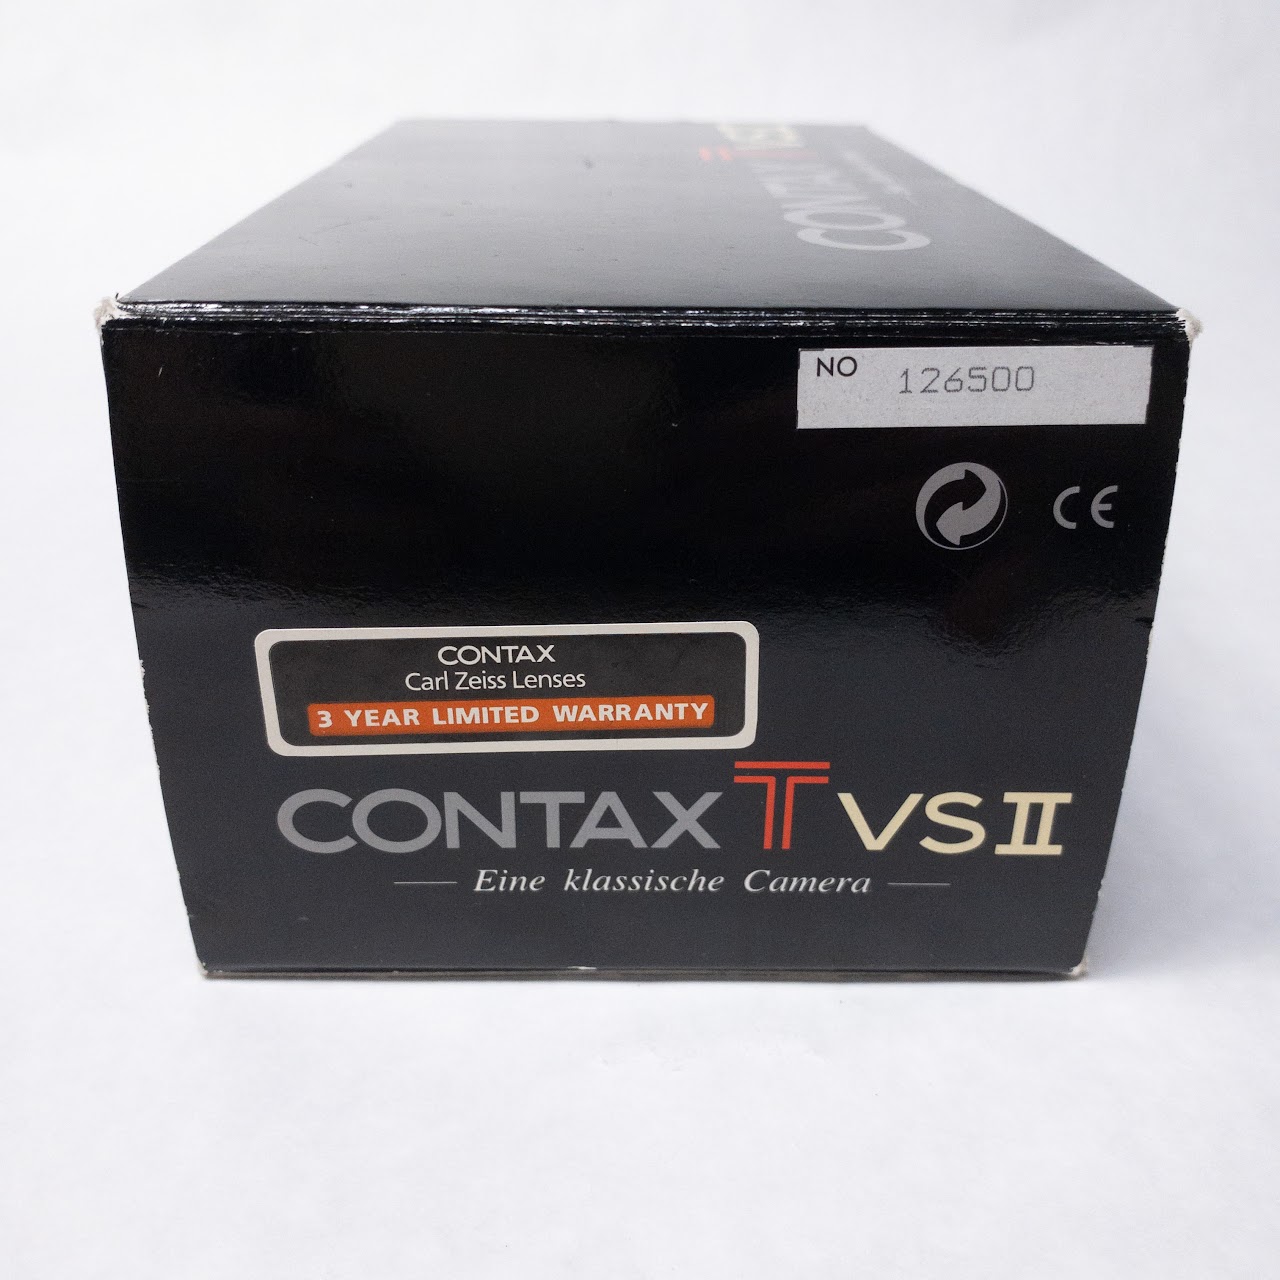 Contax TVS II Camera with with Carl Zeis Vario Sonnar 28-56mm F3.5-6.5 Lens & Accessories